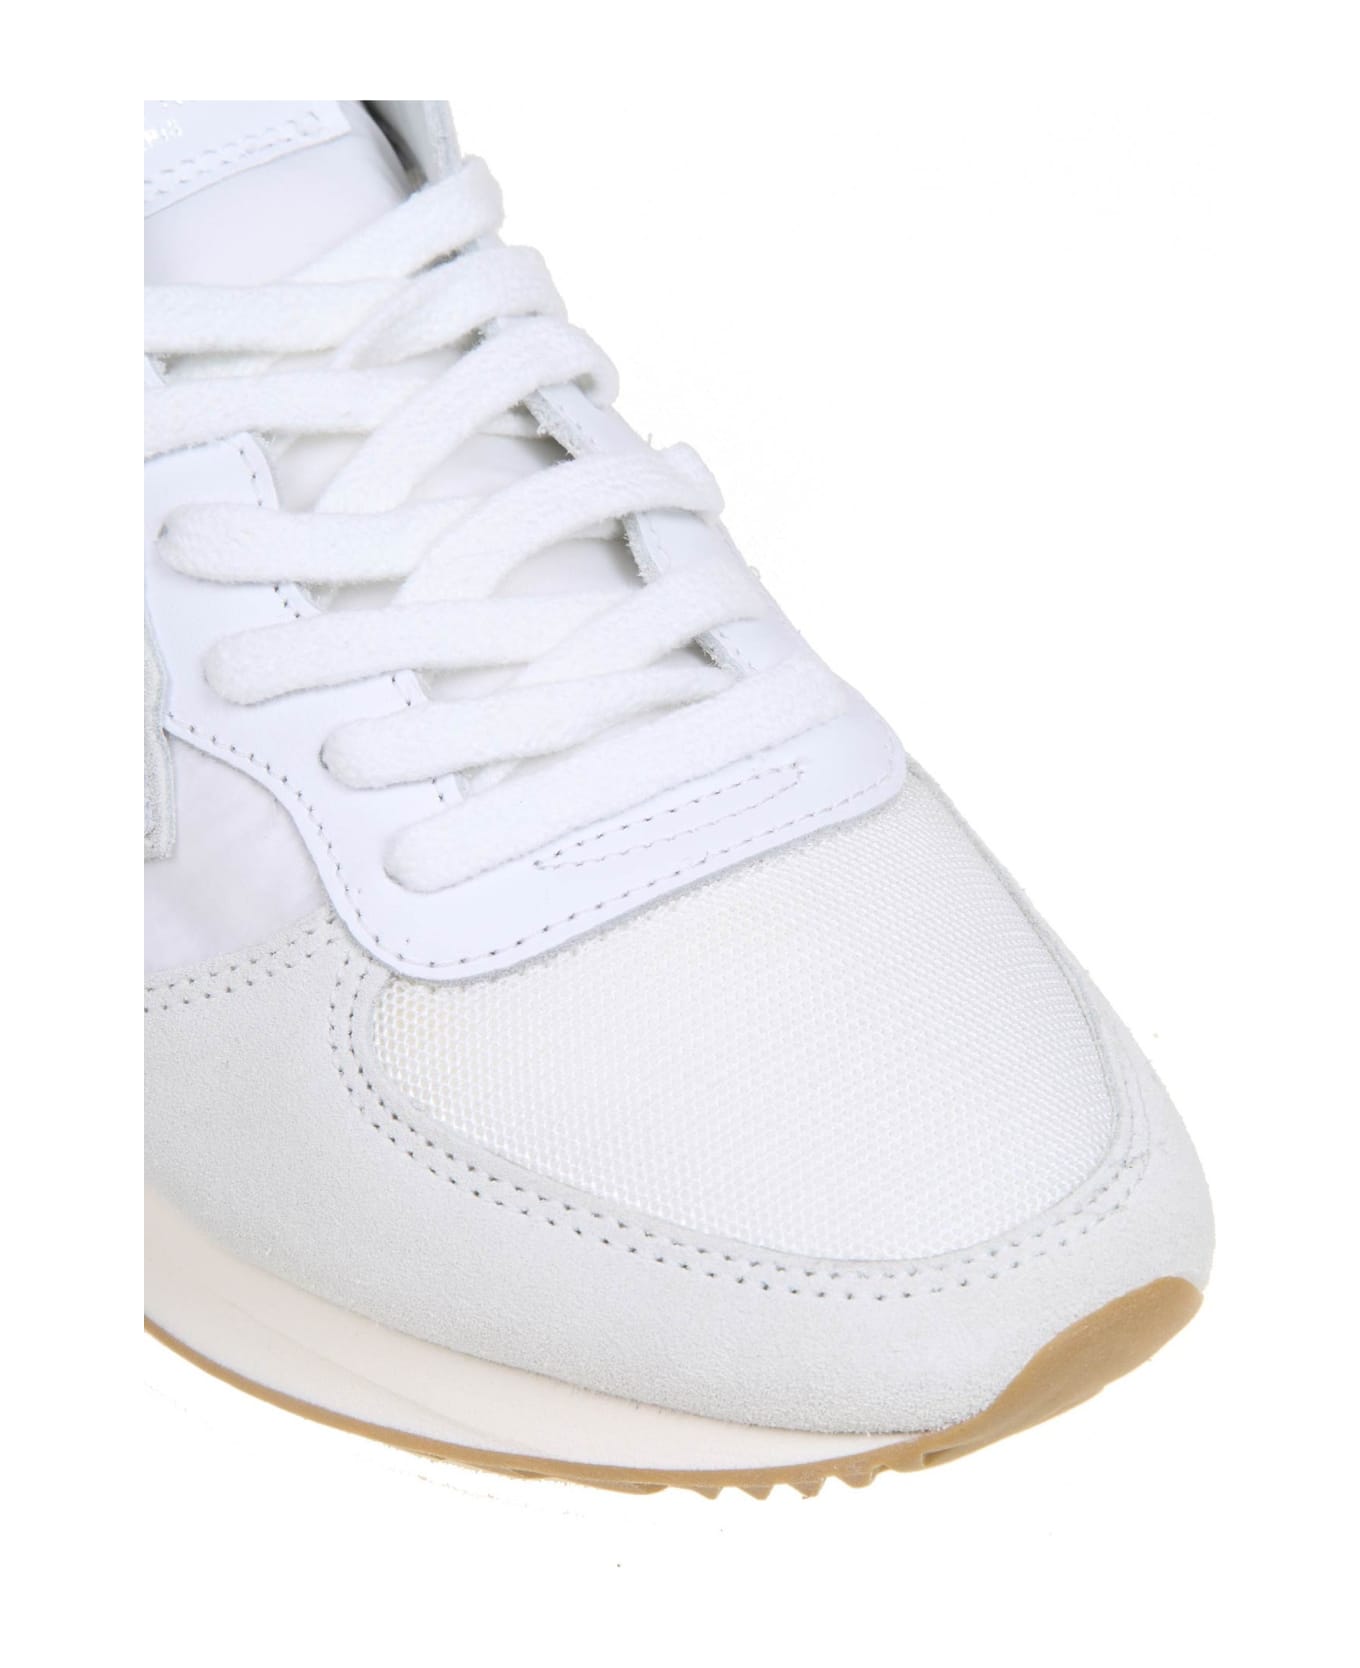 Philippe Model Trpx Sneakers In Suede And Nylon - WHITE